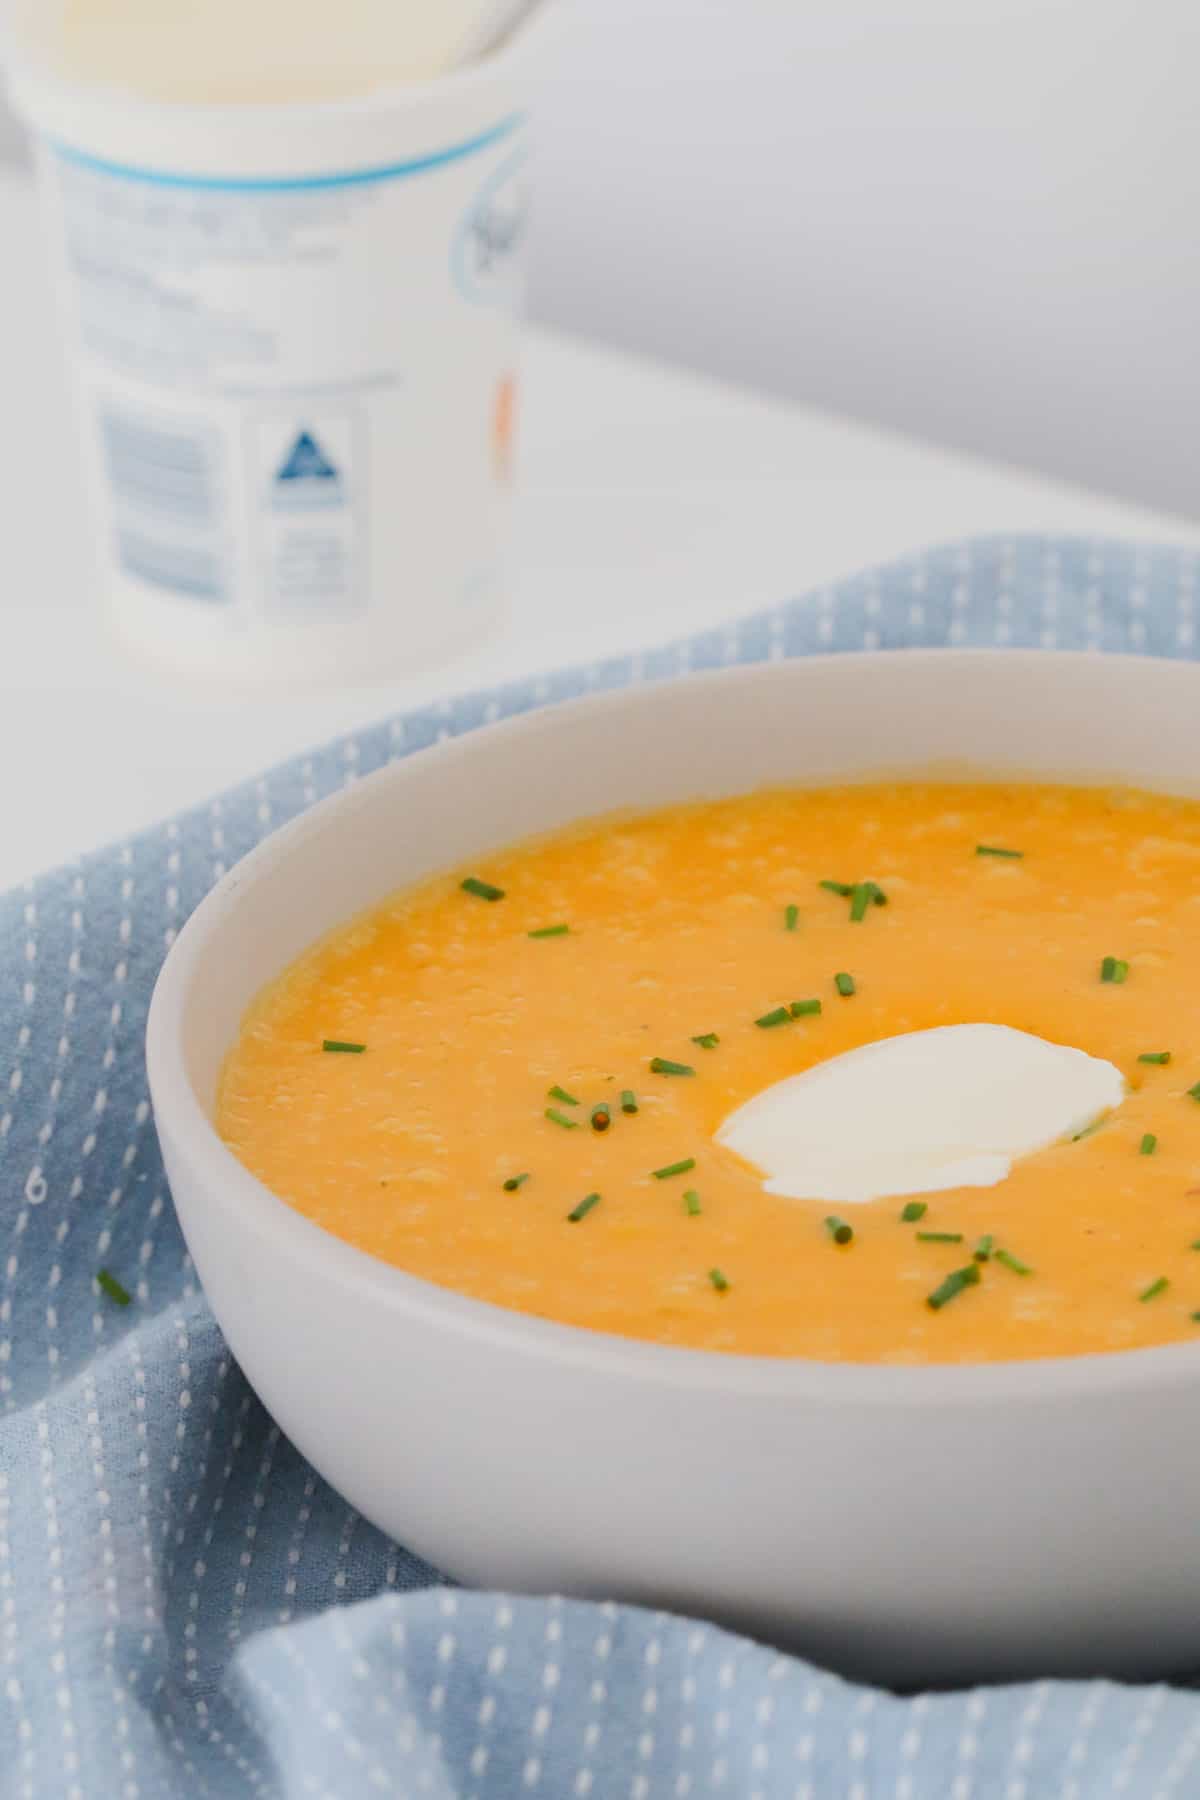 Sour cream and chives on top of a bowl of pumpkin soup.